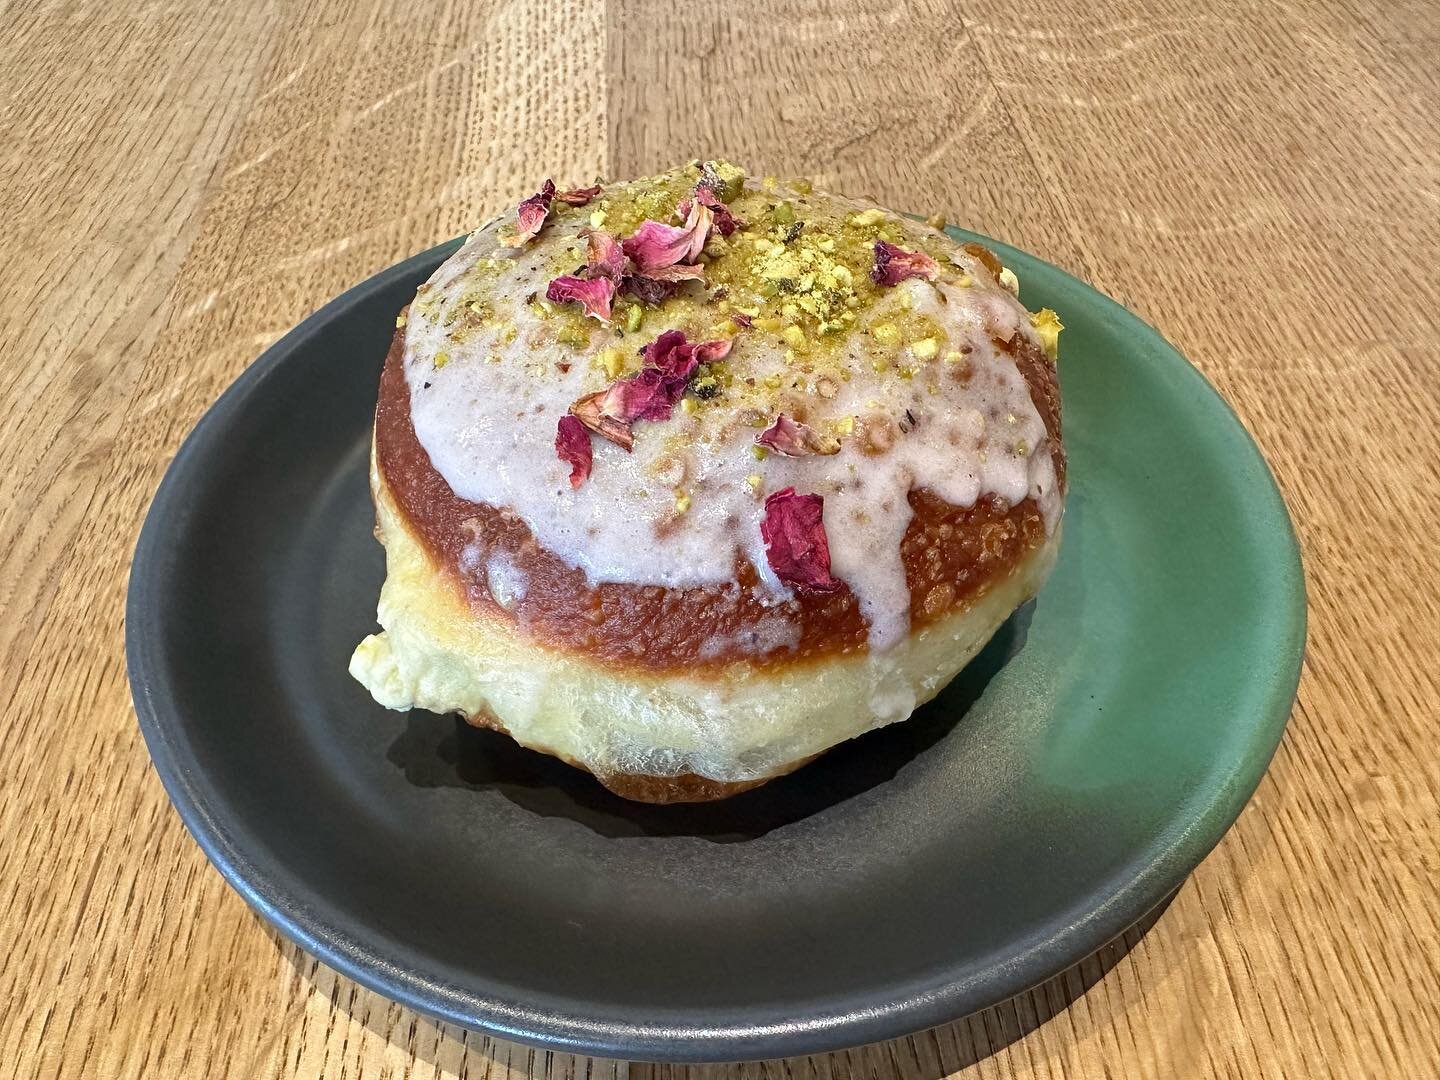 Finally made it to @automat_sf and tried one of the most delicious things I&rsquo;ve ever eaten. This pistachio rose donut filled with Bavarian cream had the most lush and pillowy texture. It brought so much joy during this rainy weekend. Side note, 